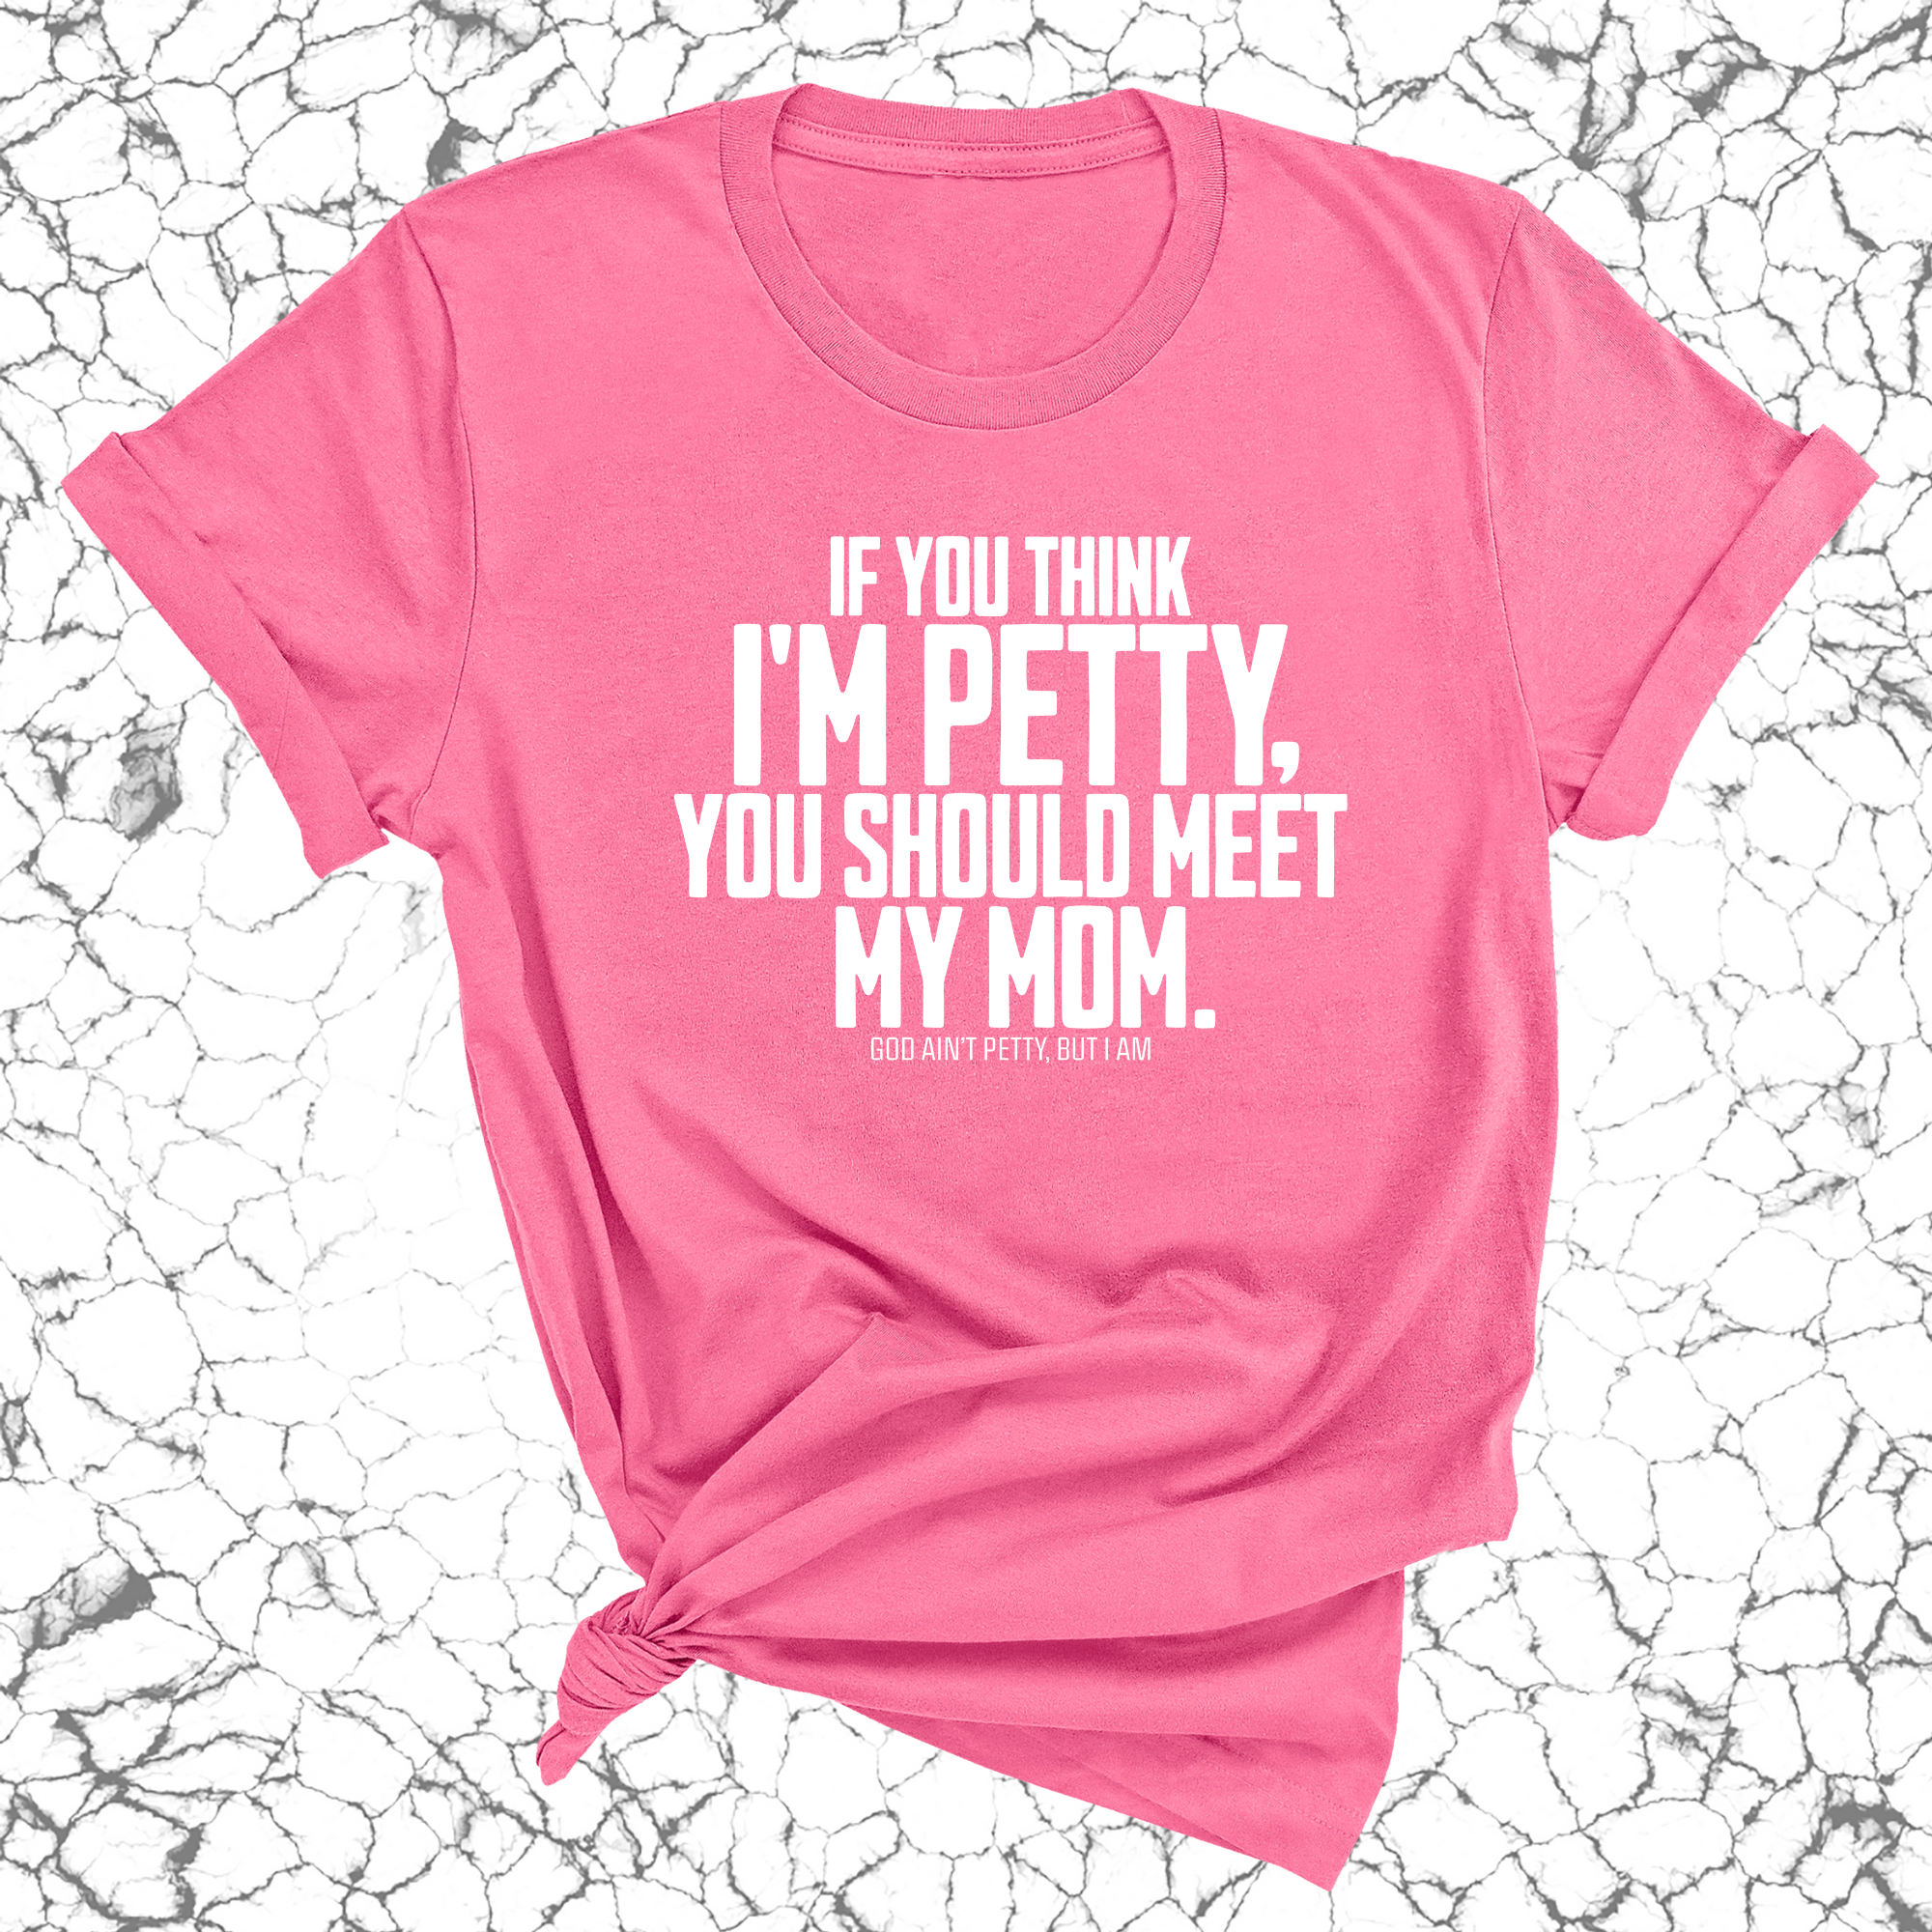 If you think I'm Petty, you should meet my Mom Unisex Tee-T-Shirt-The Original God Ain't Petty But I Am